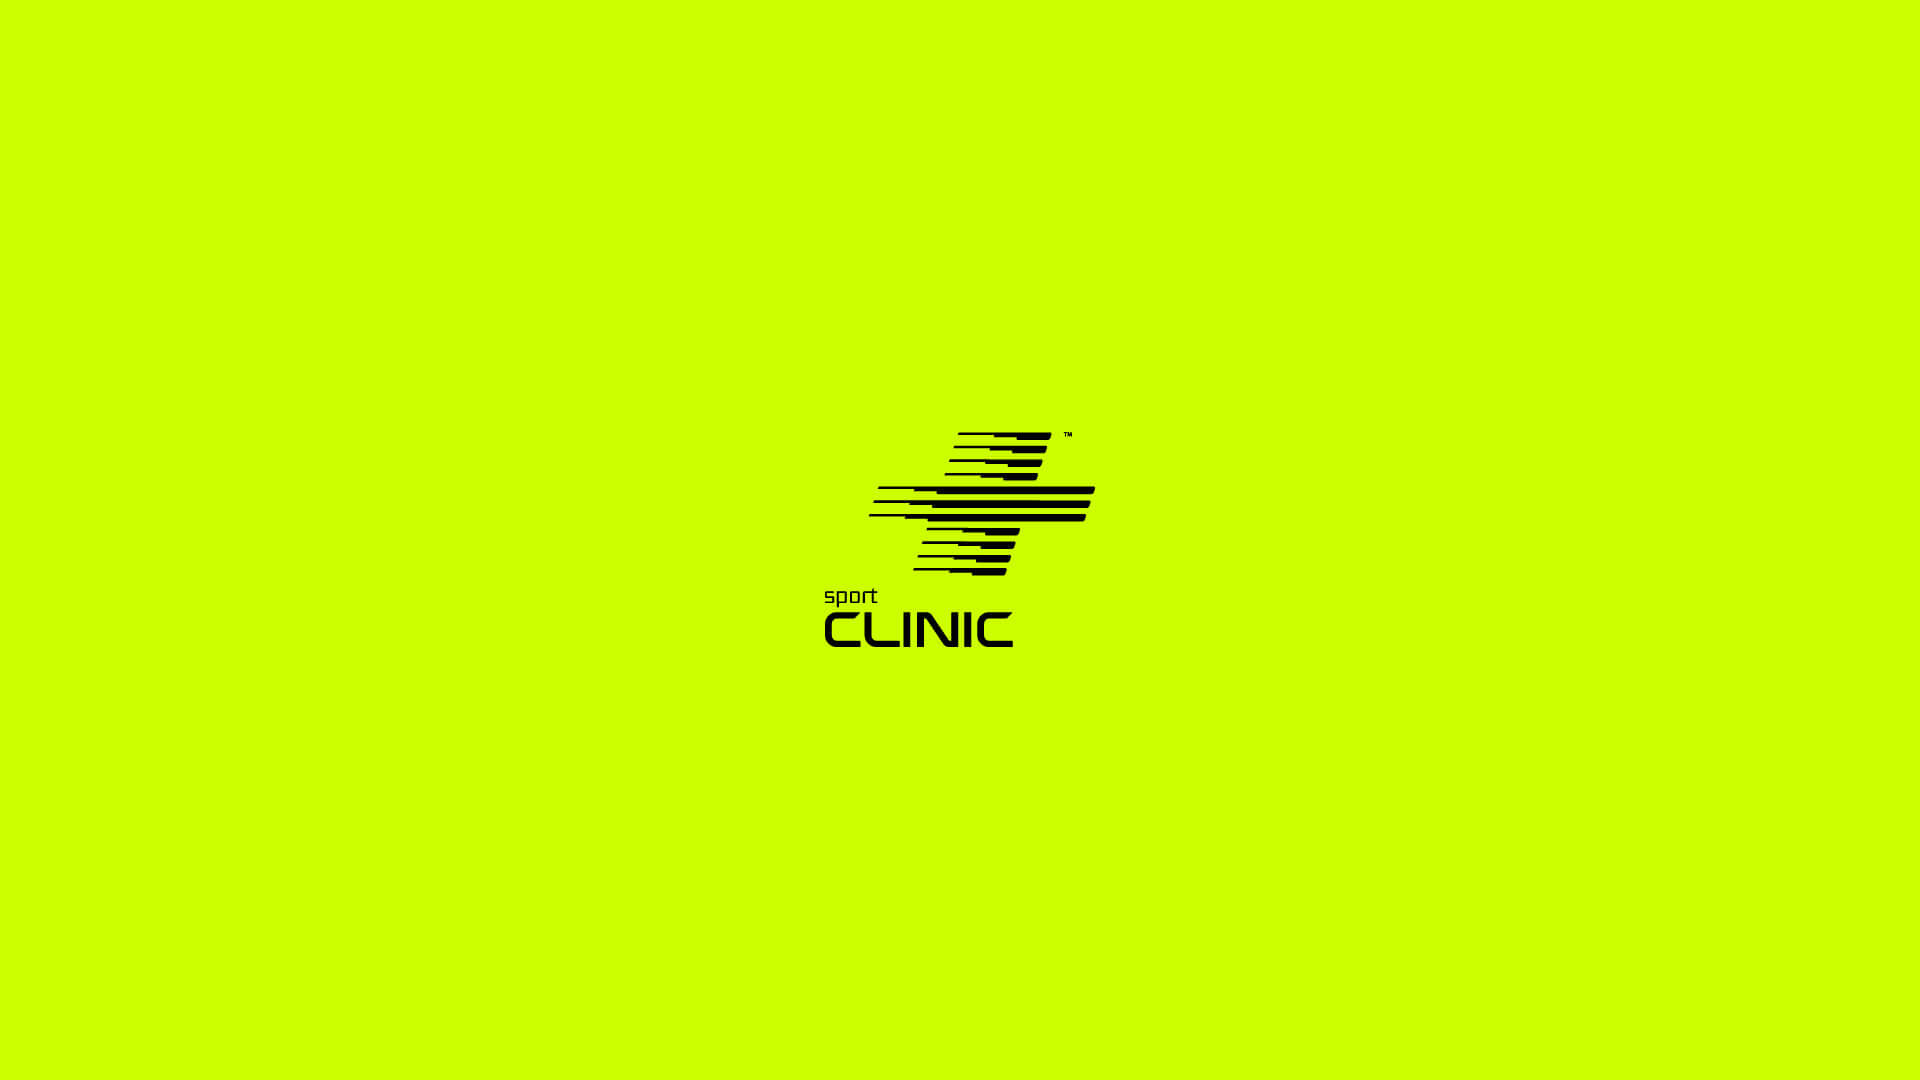 Clinic_layout_04